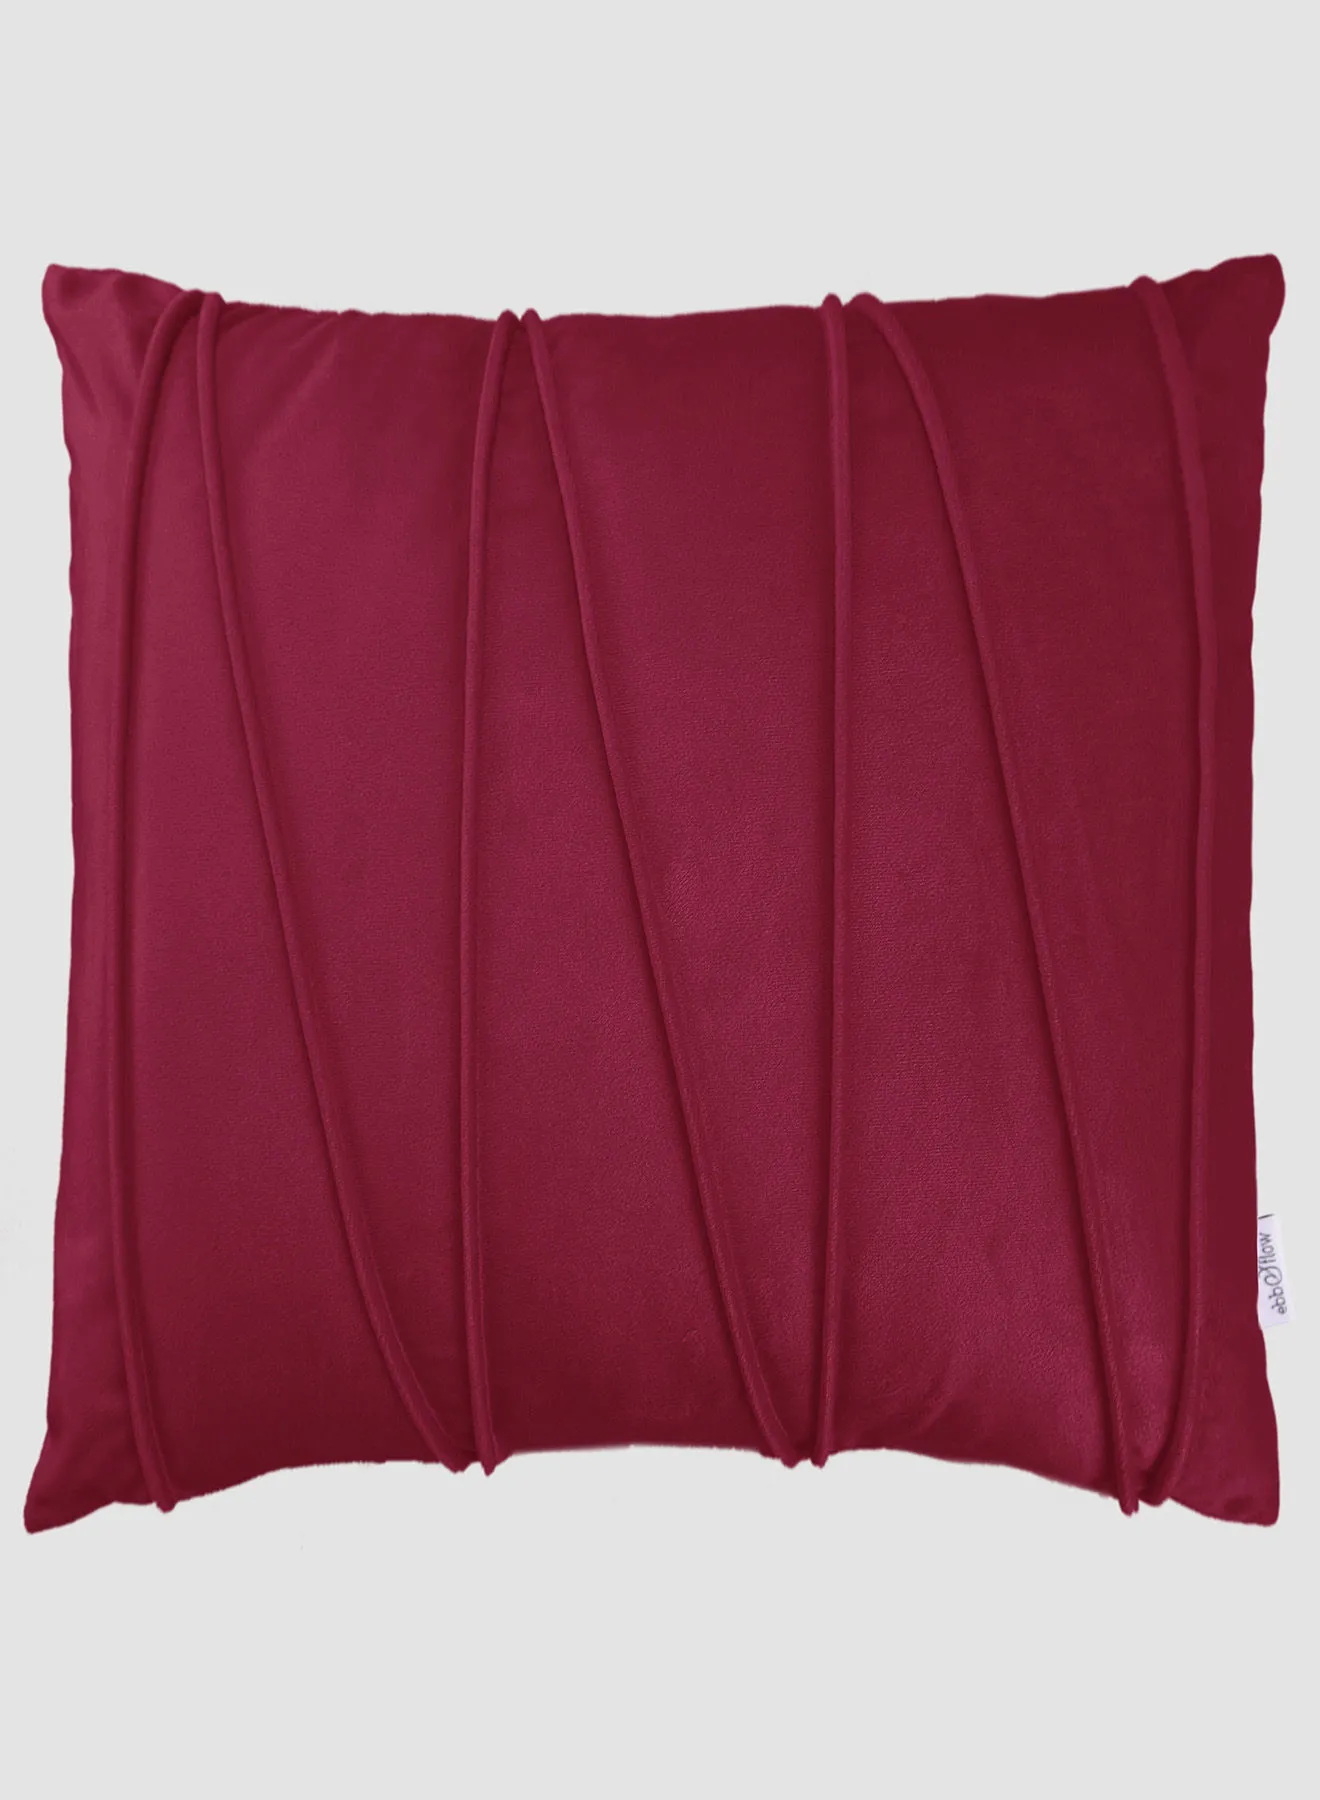 ebb & flow 3D Velvet Cushion  II,Unique Luxury Quality Decor Items for the Perfect Stylish Home Red 55 x 55cm